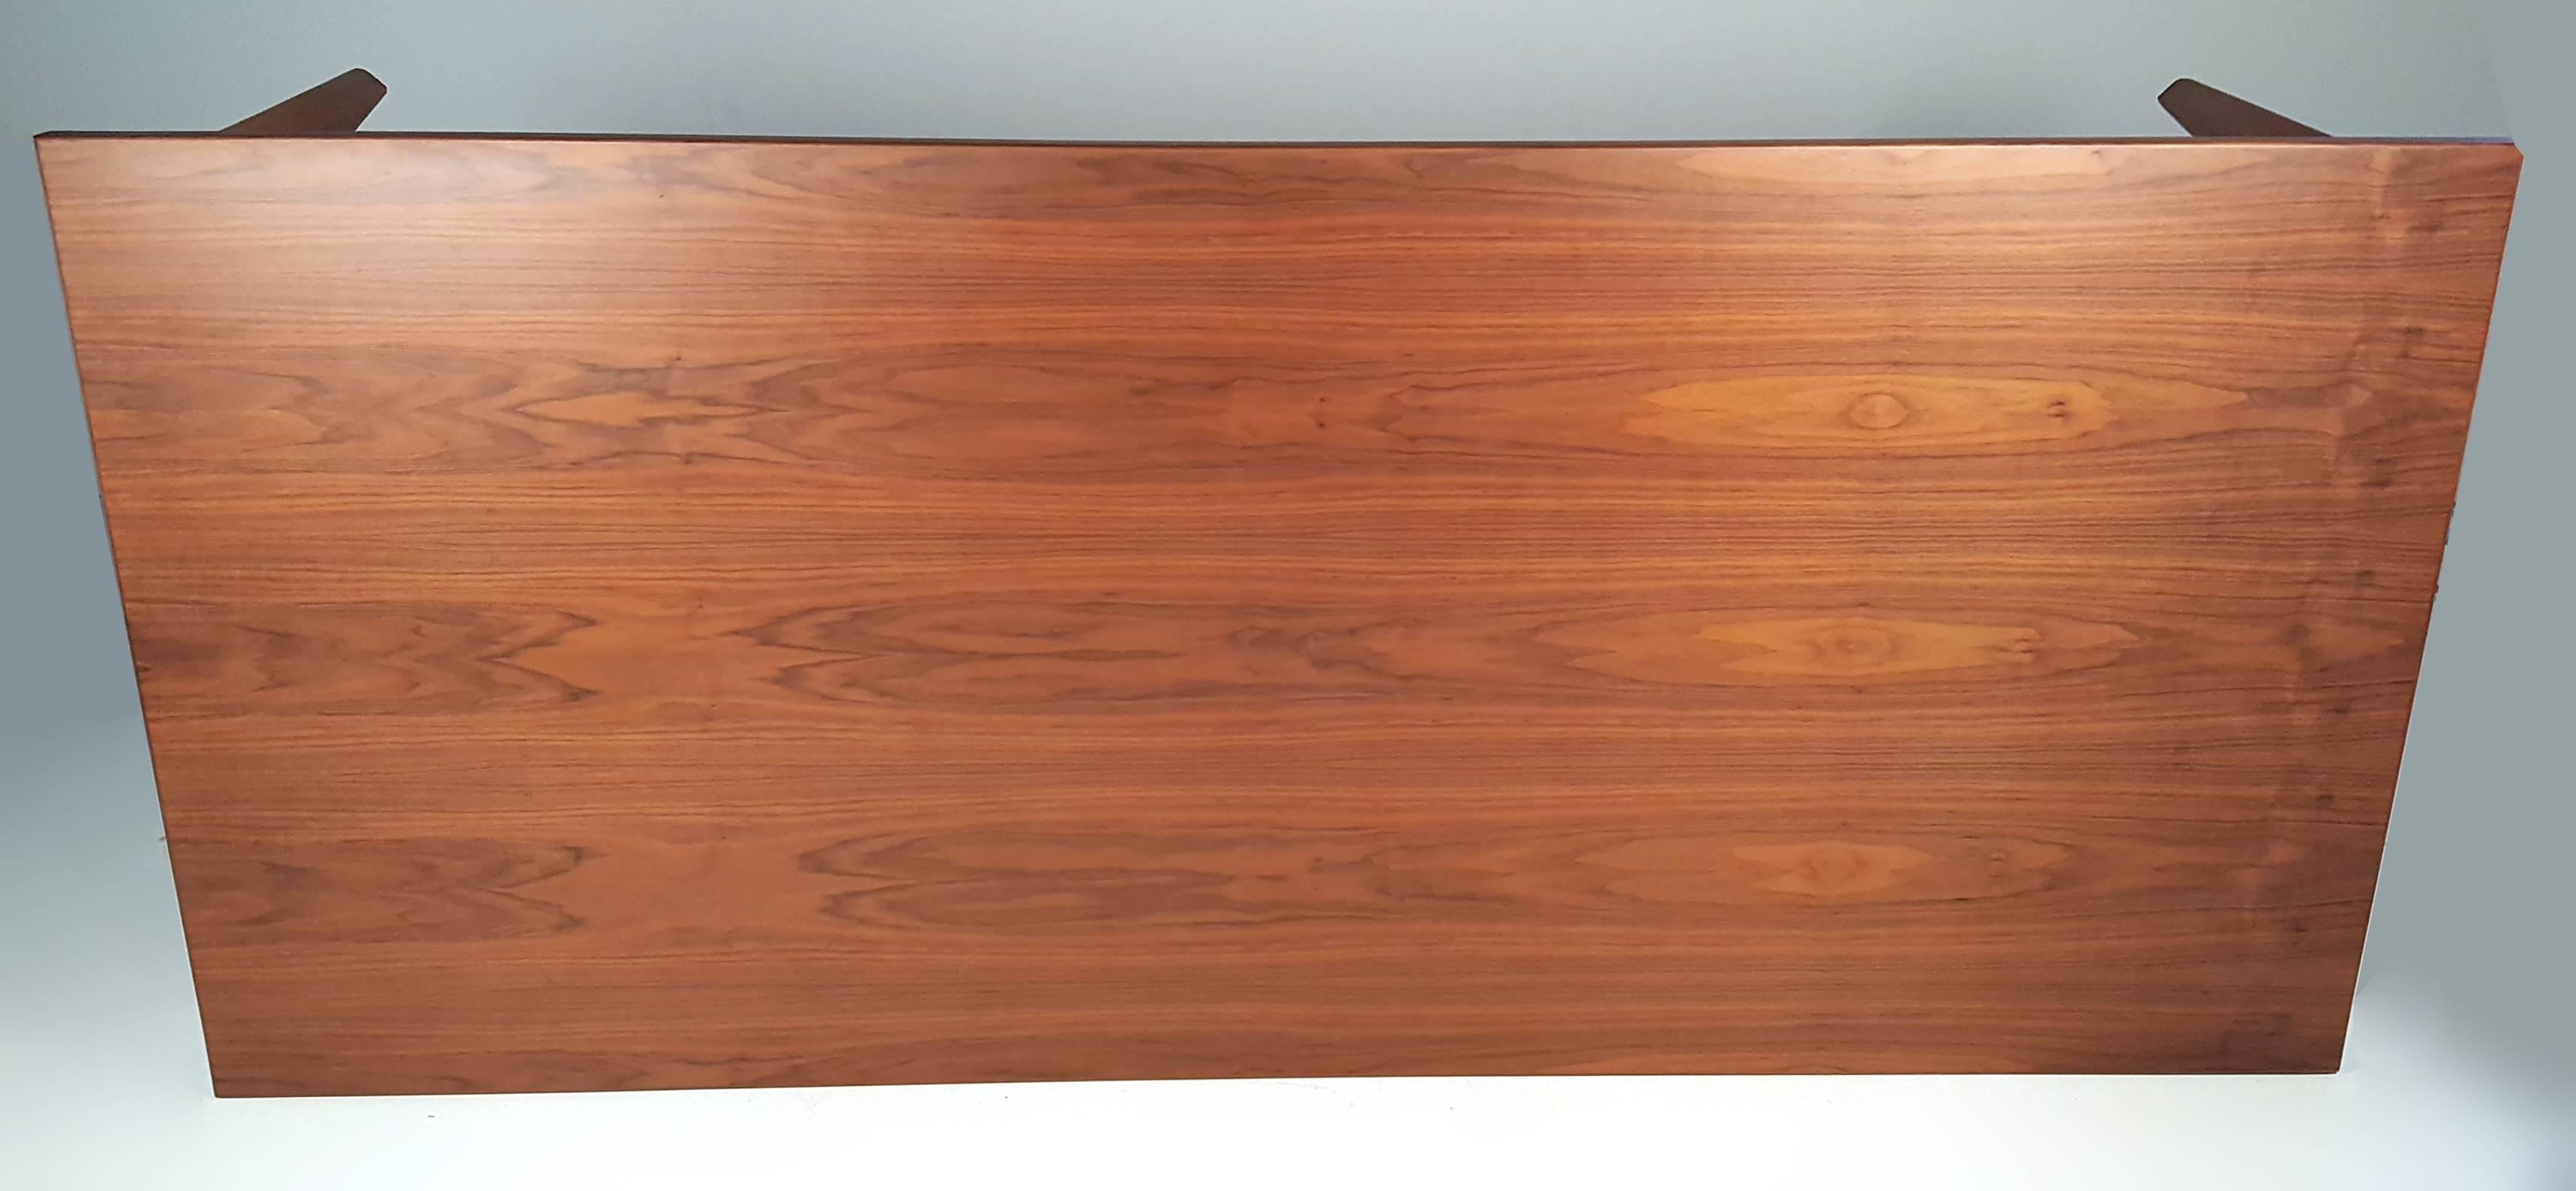 Mid-Century Modern Custom-Made Solid Walnut Dining Table from the Studio of Ben Kanowsky